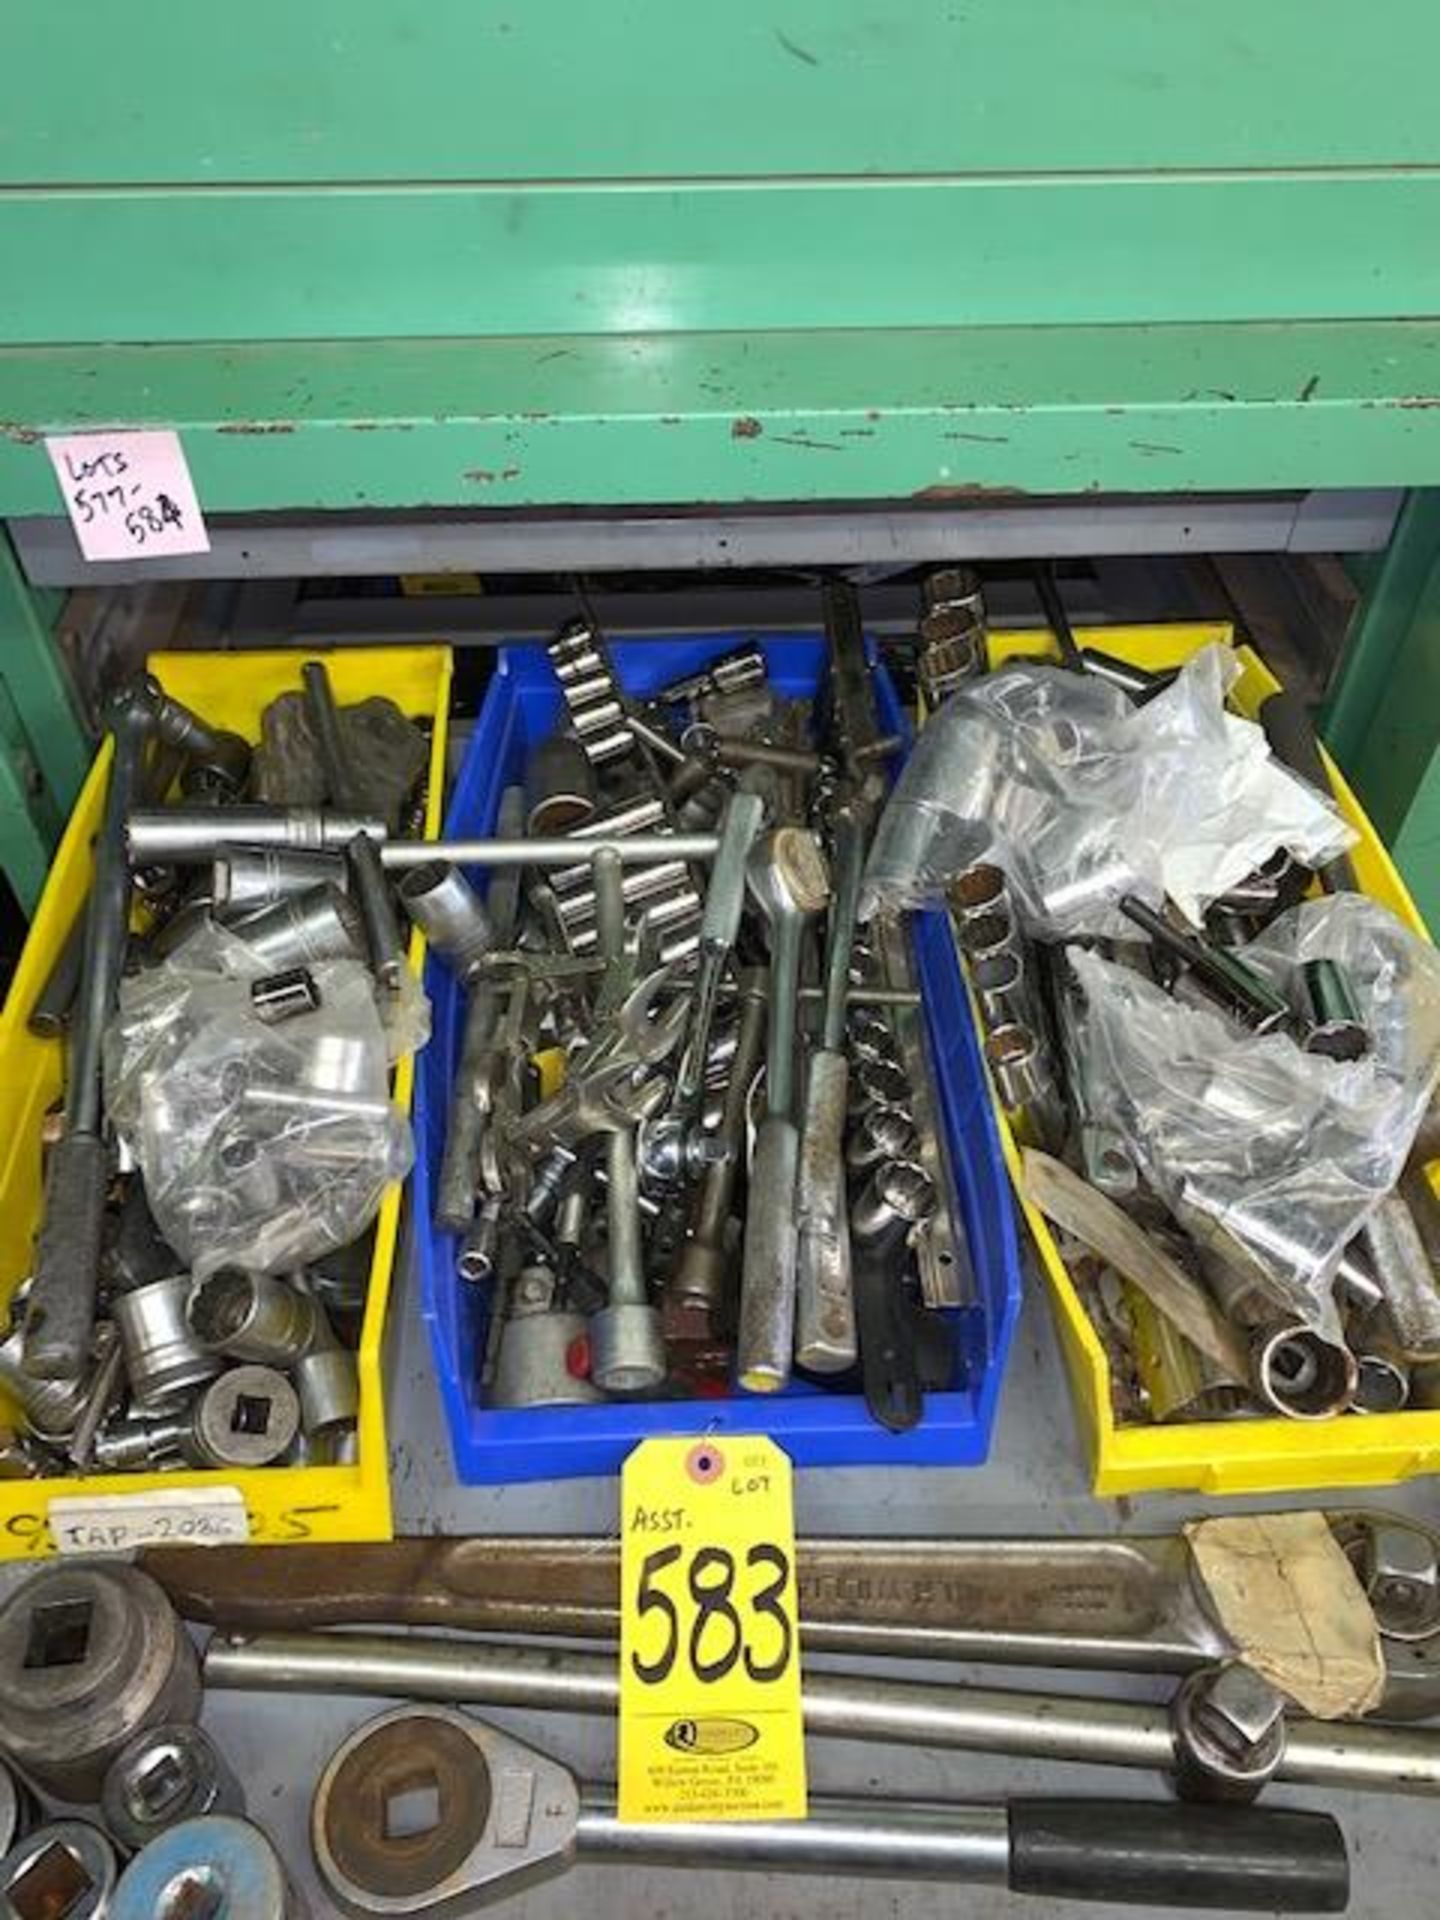 ASSORTED SOCKETS AND WRENCHES (2ND SHELF OF LOT 554 - LEFT SIDE)